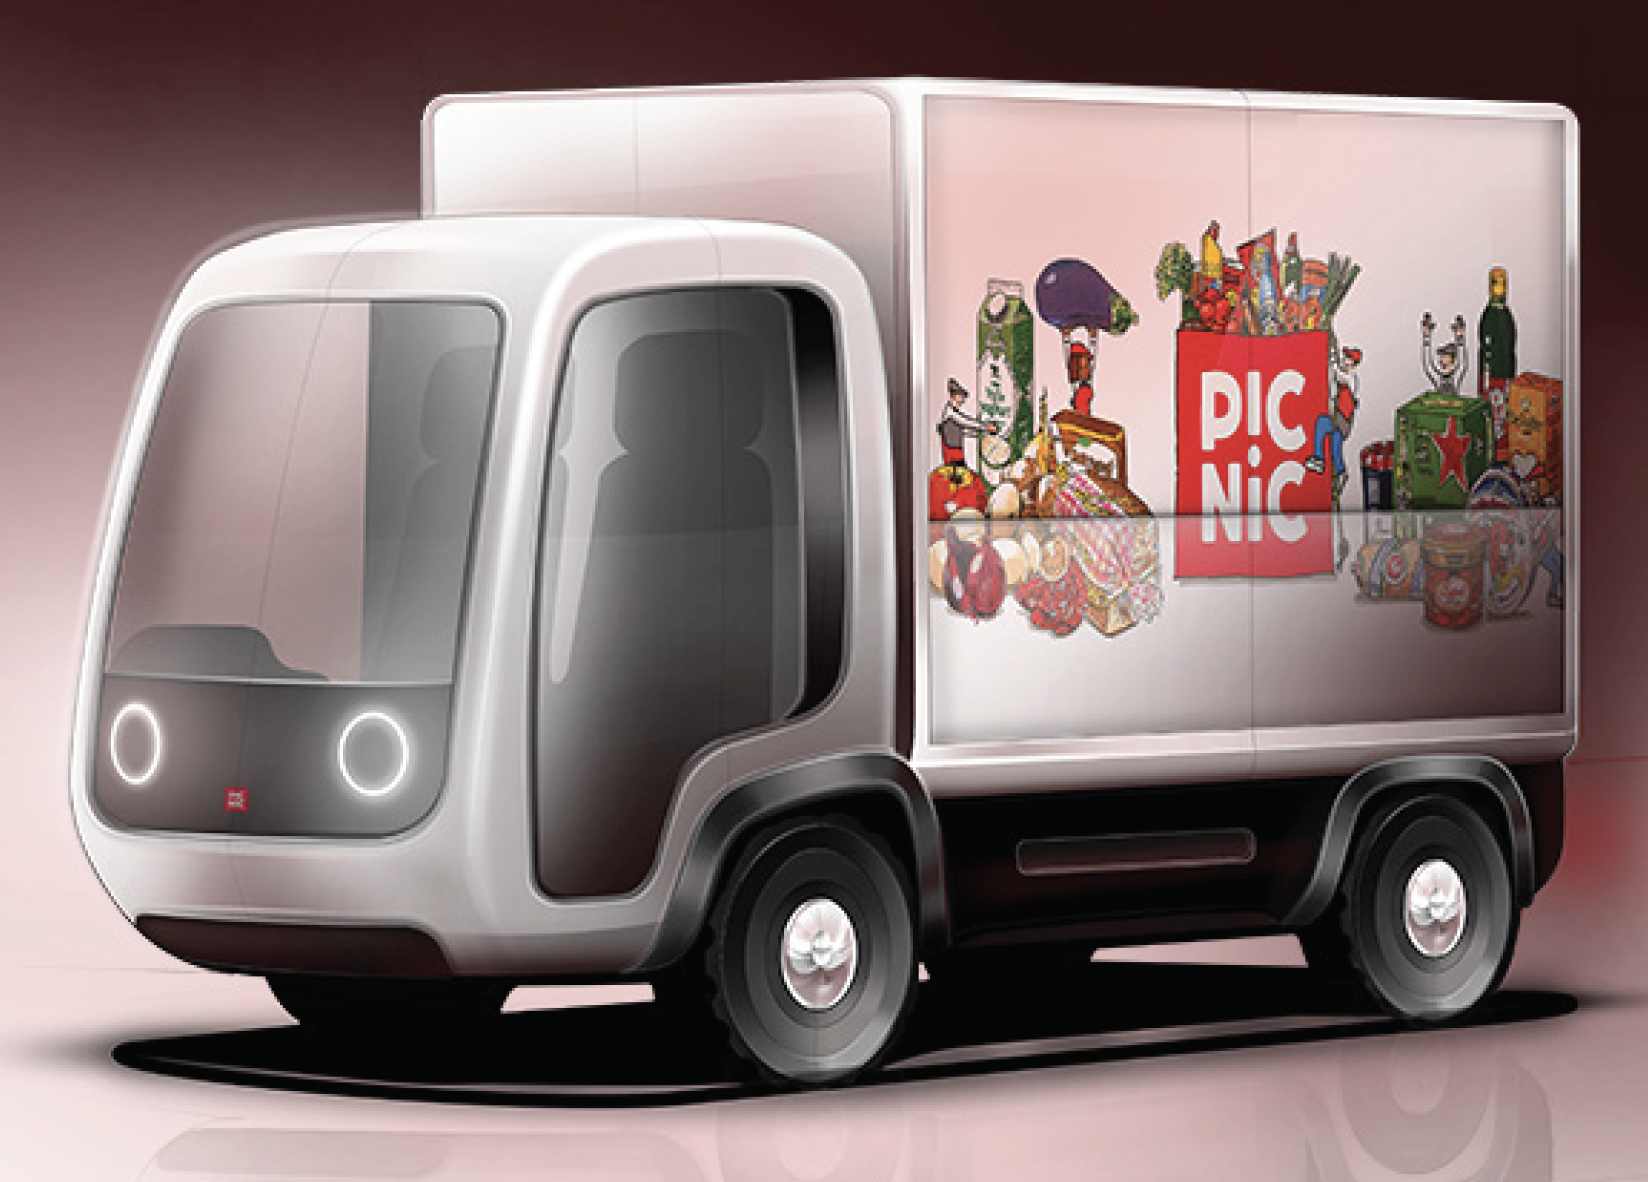 Designing a new lastmile delivery vehicle for Picnic CityLogistics